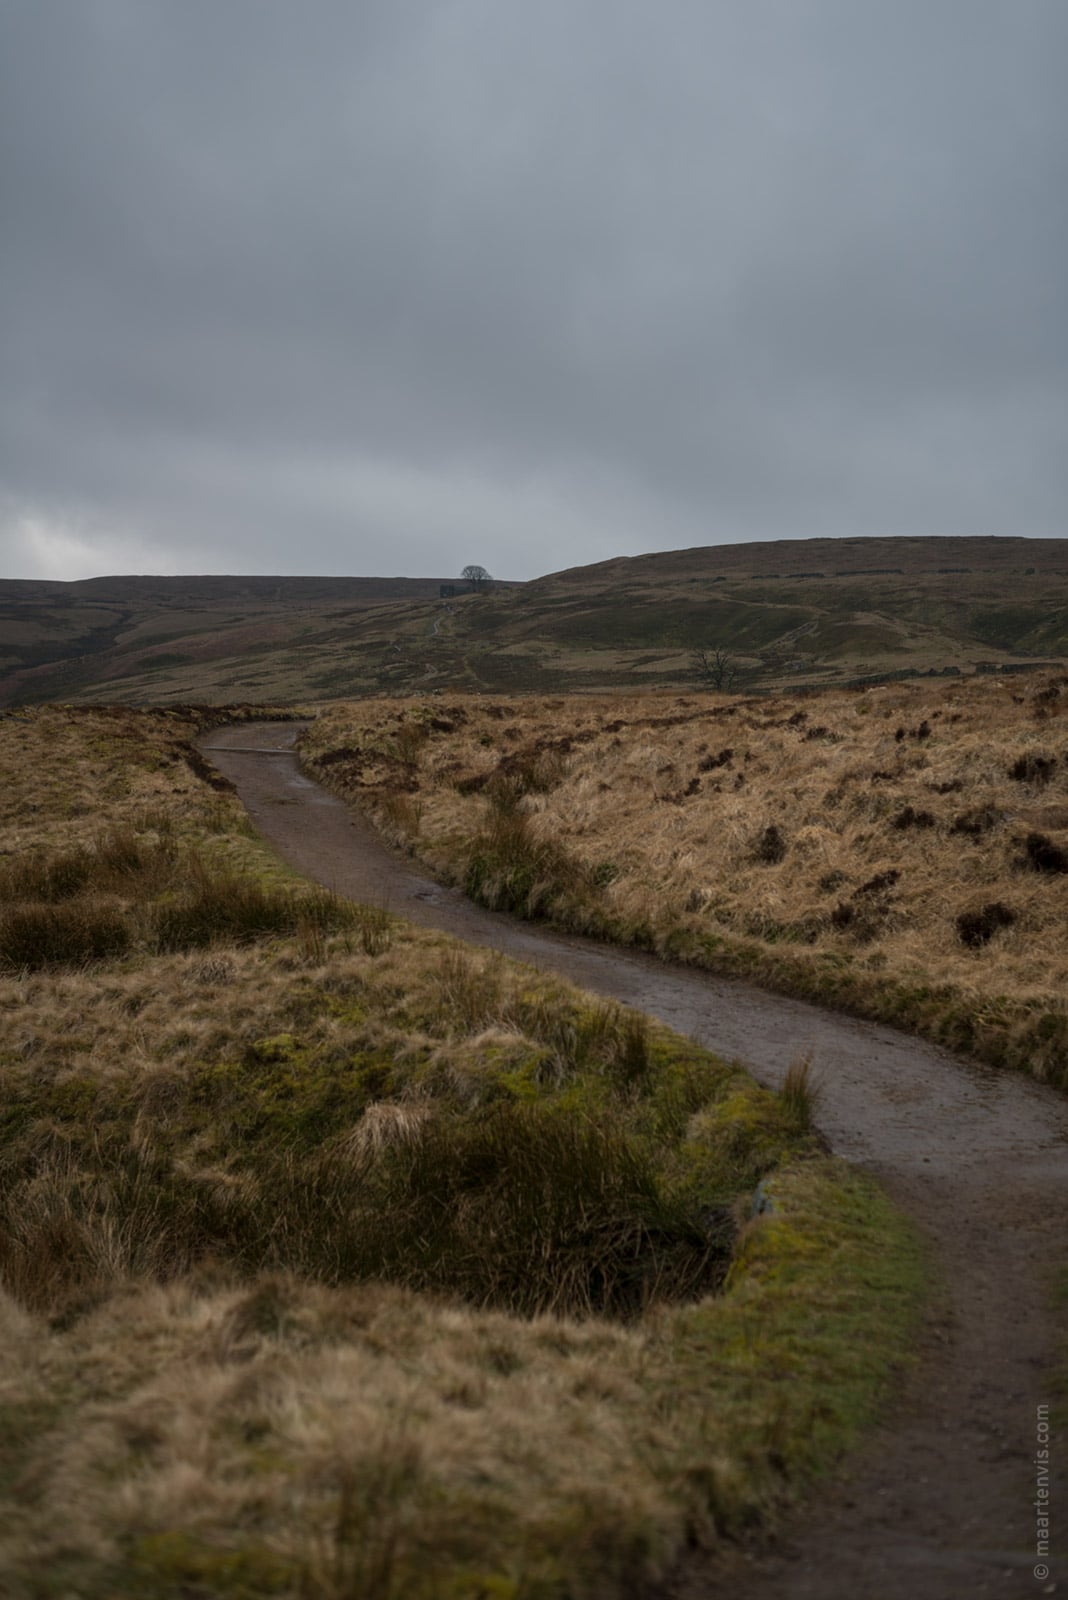 20160324 8107 - Hiking on the Moors with the Brontë sisters